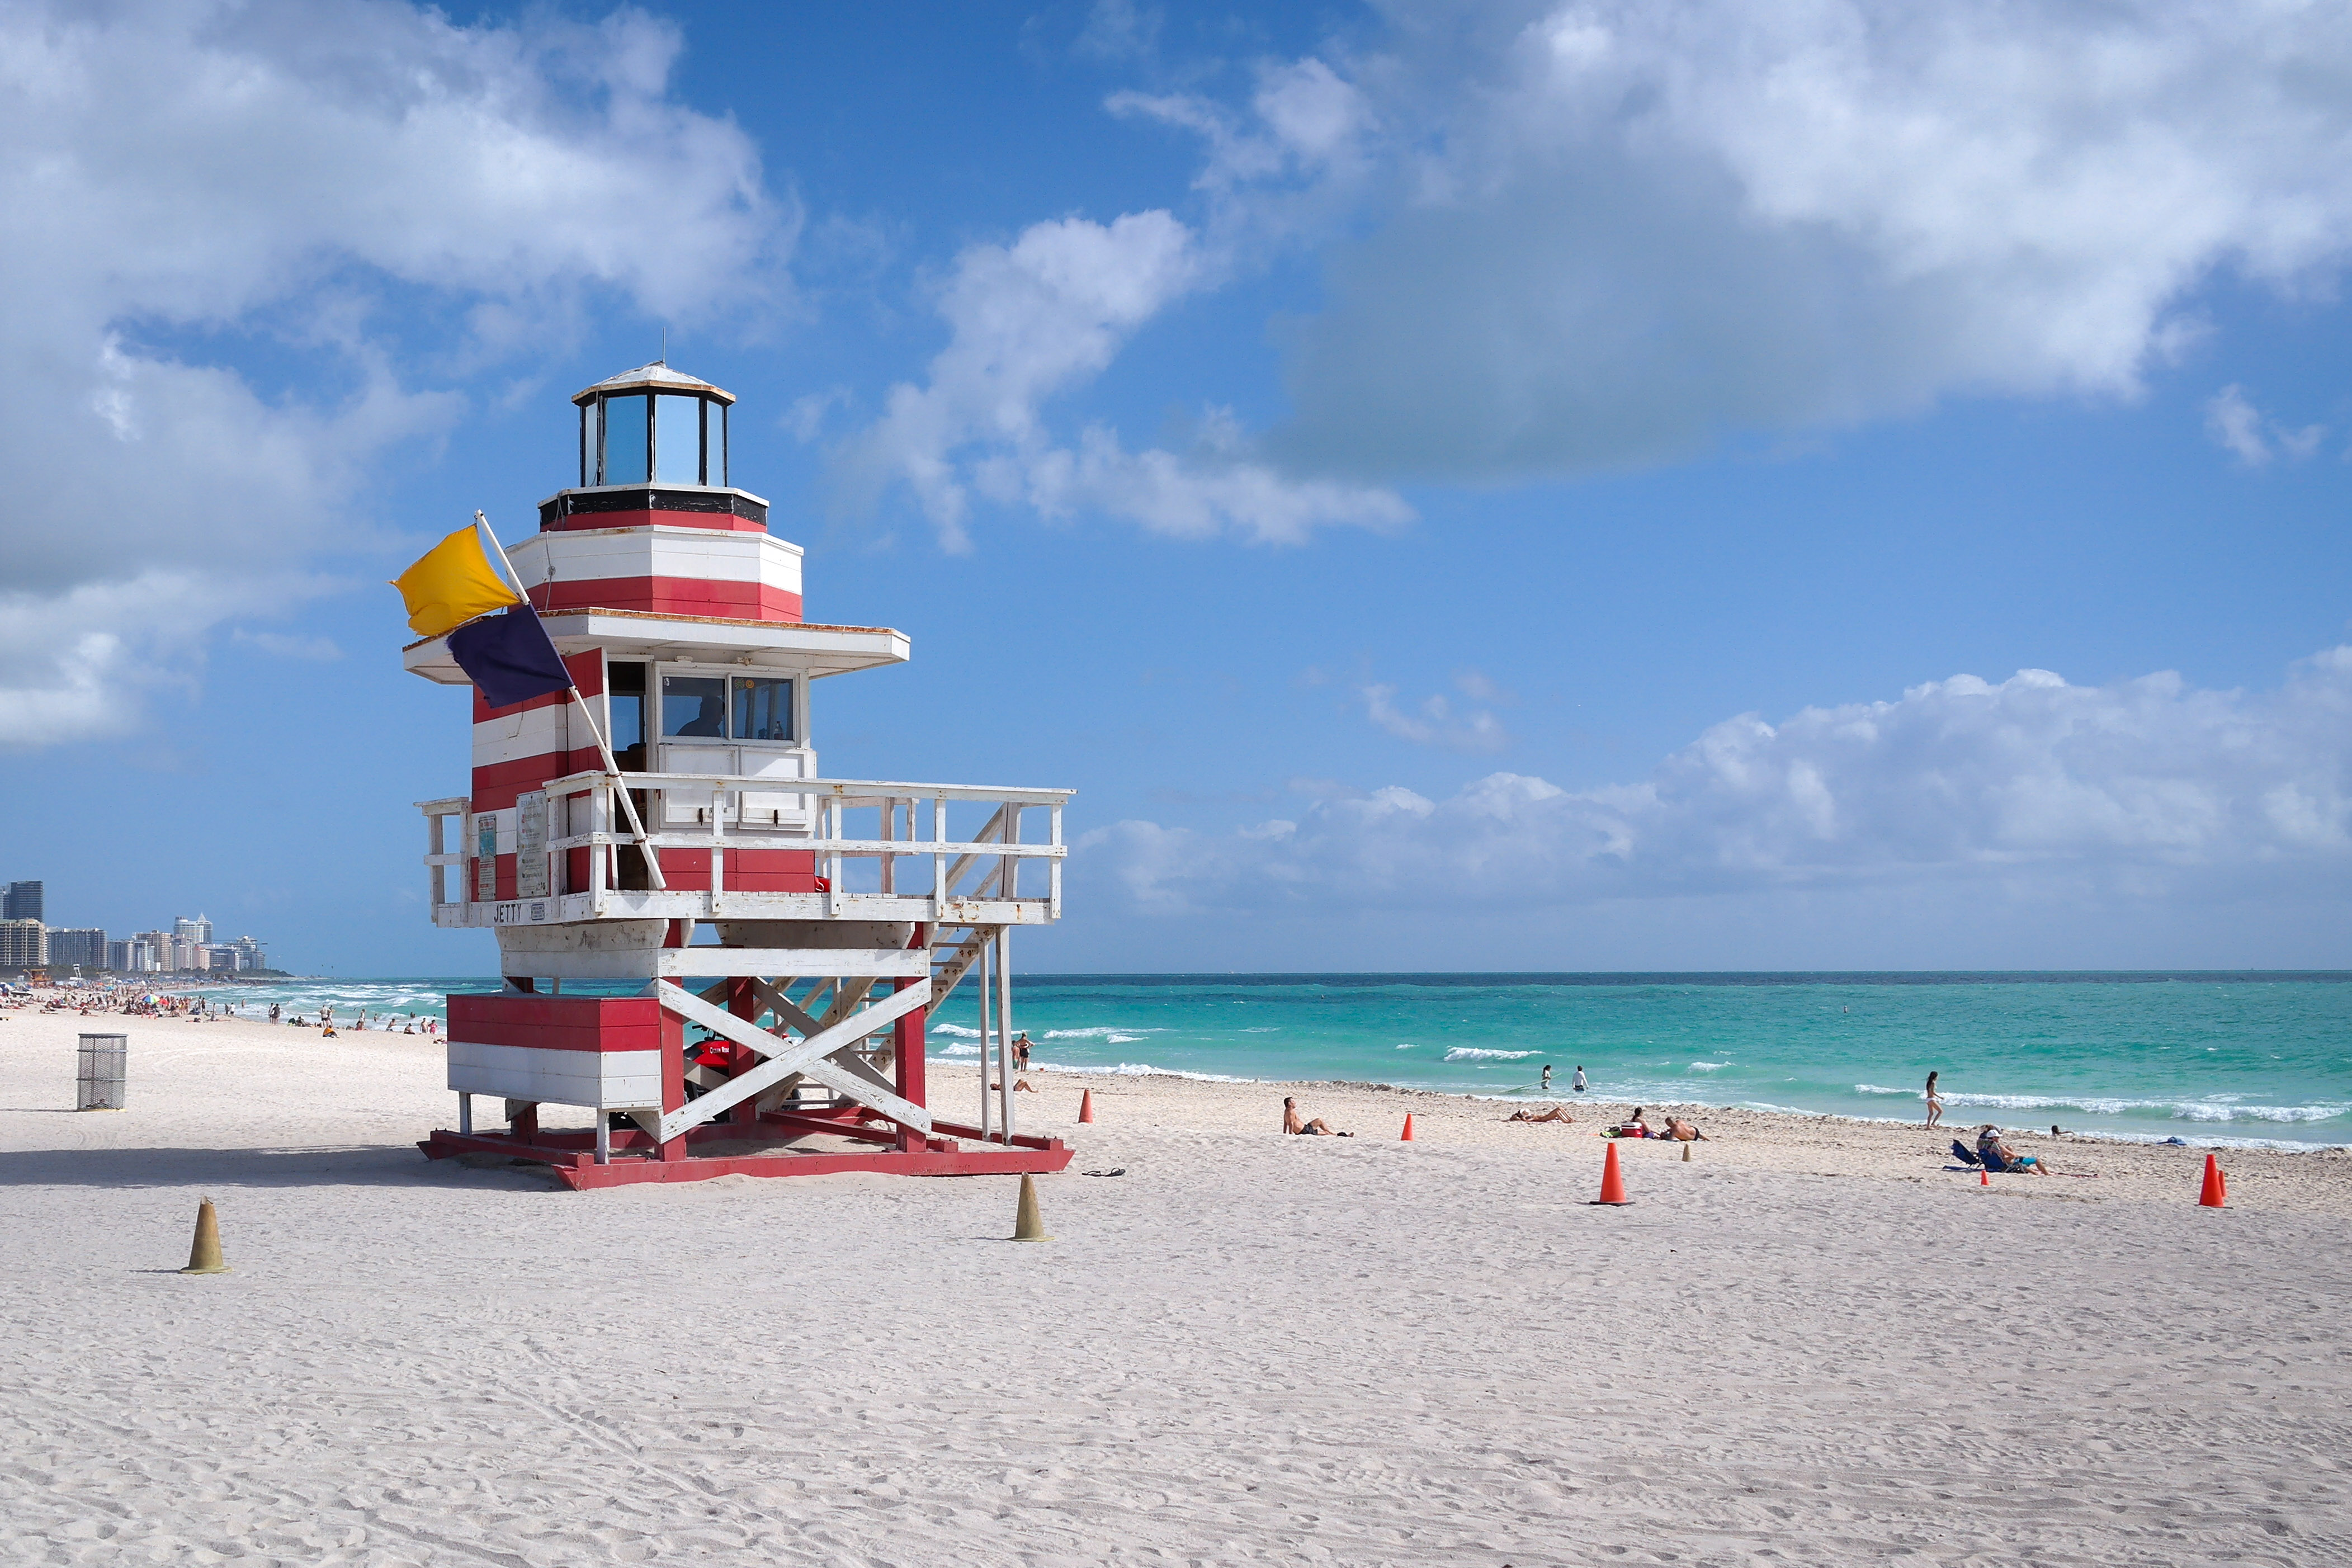 File:Lifeguard Tower (South Pointe Beach).jpg - Wikimedia Commons